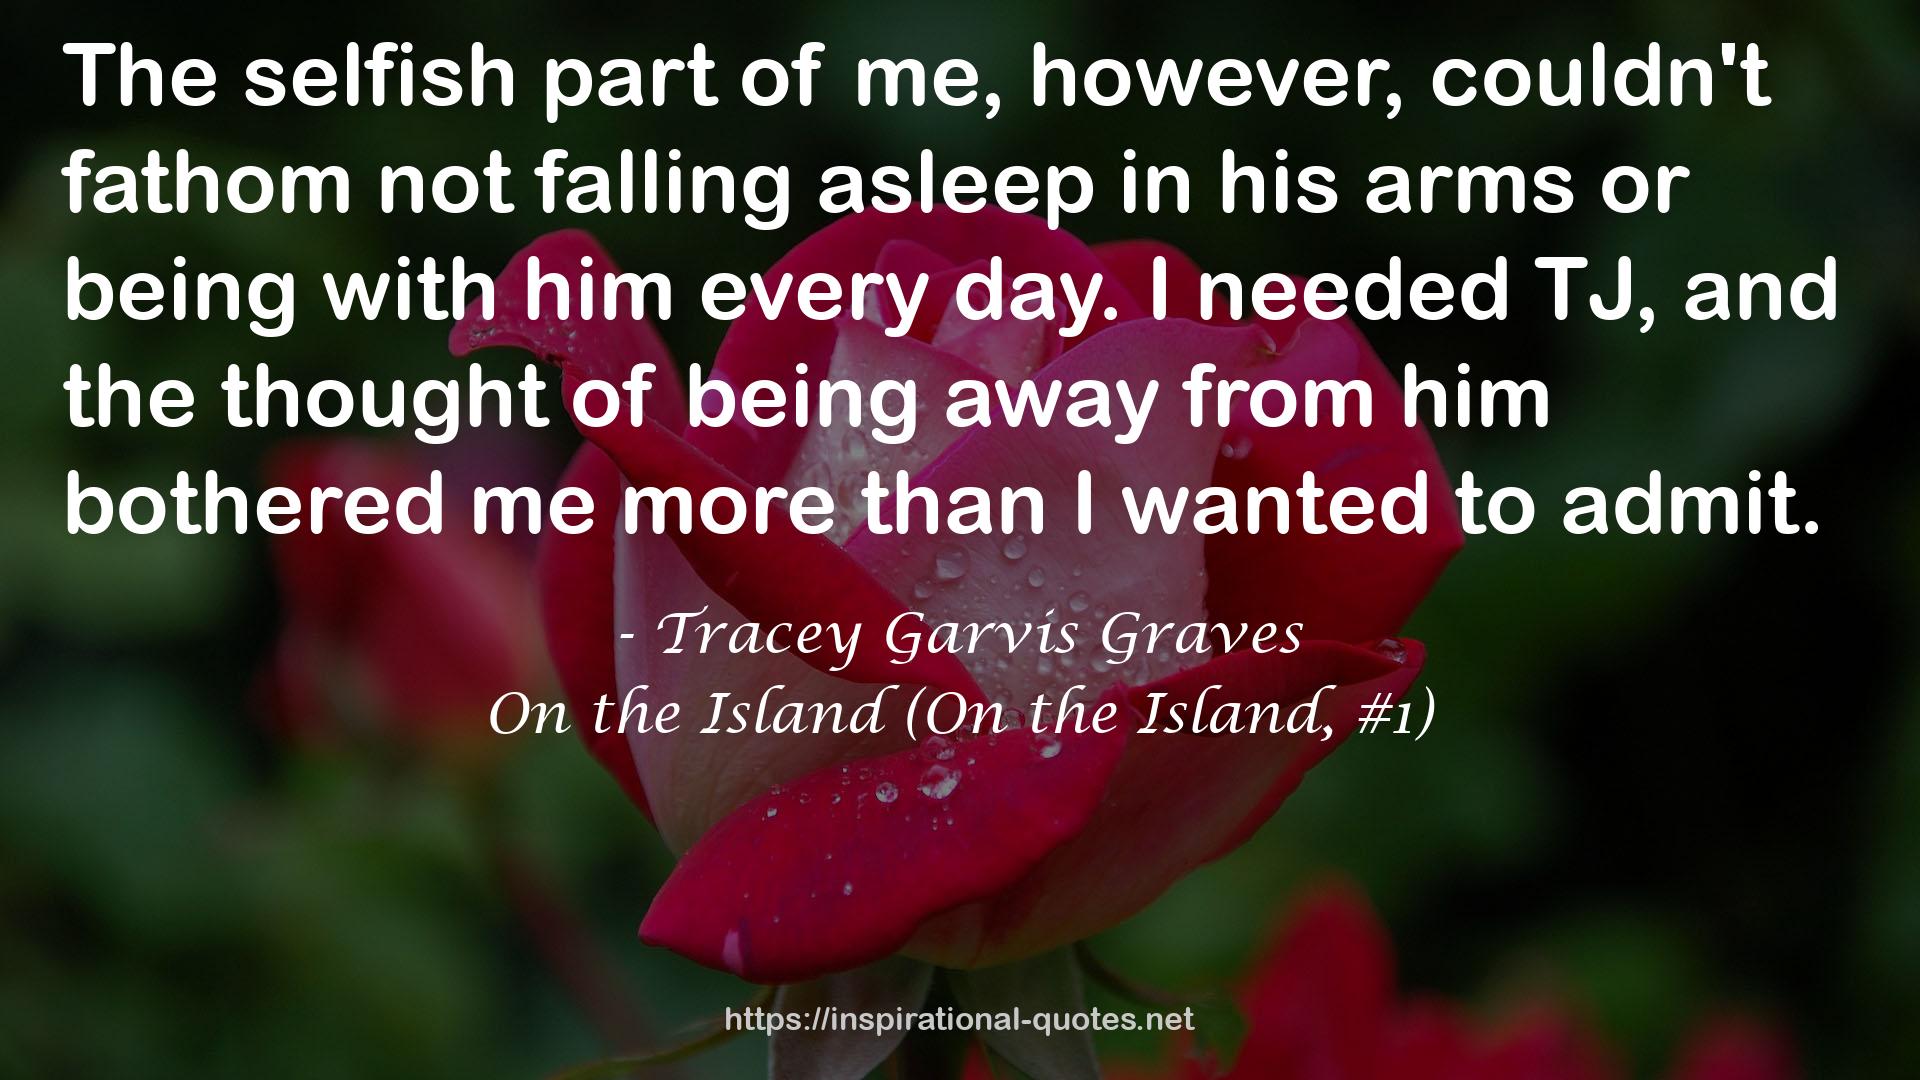 On the Island (On the Island, #1) QUOTES